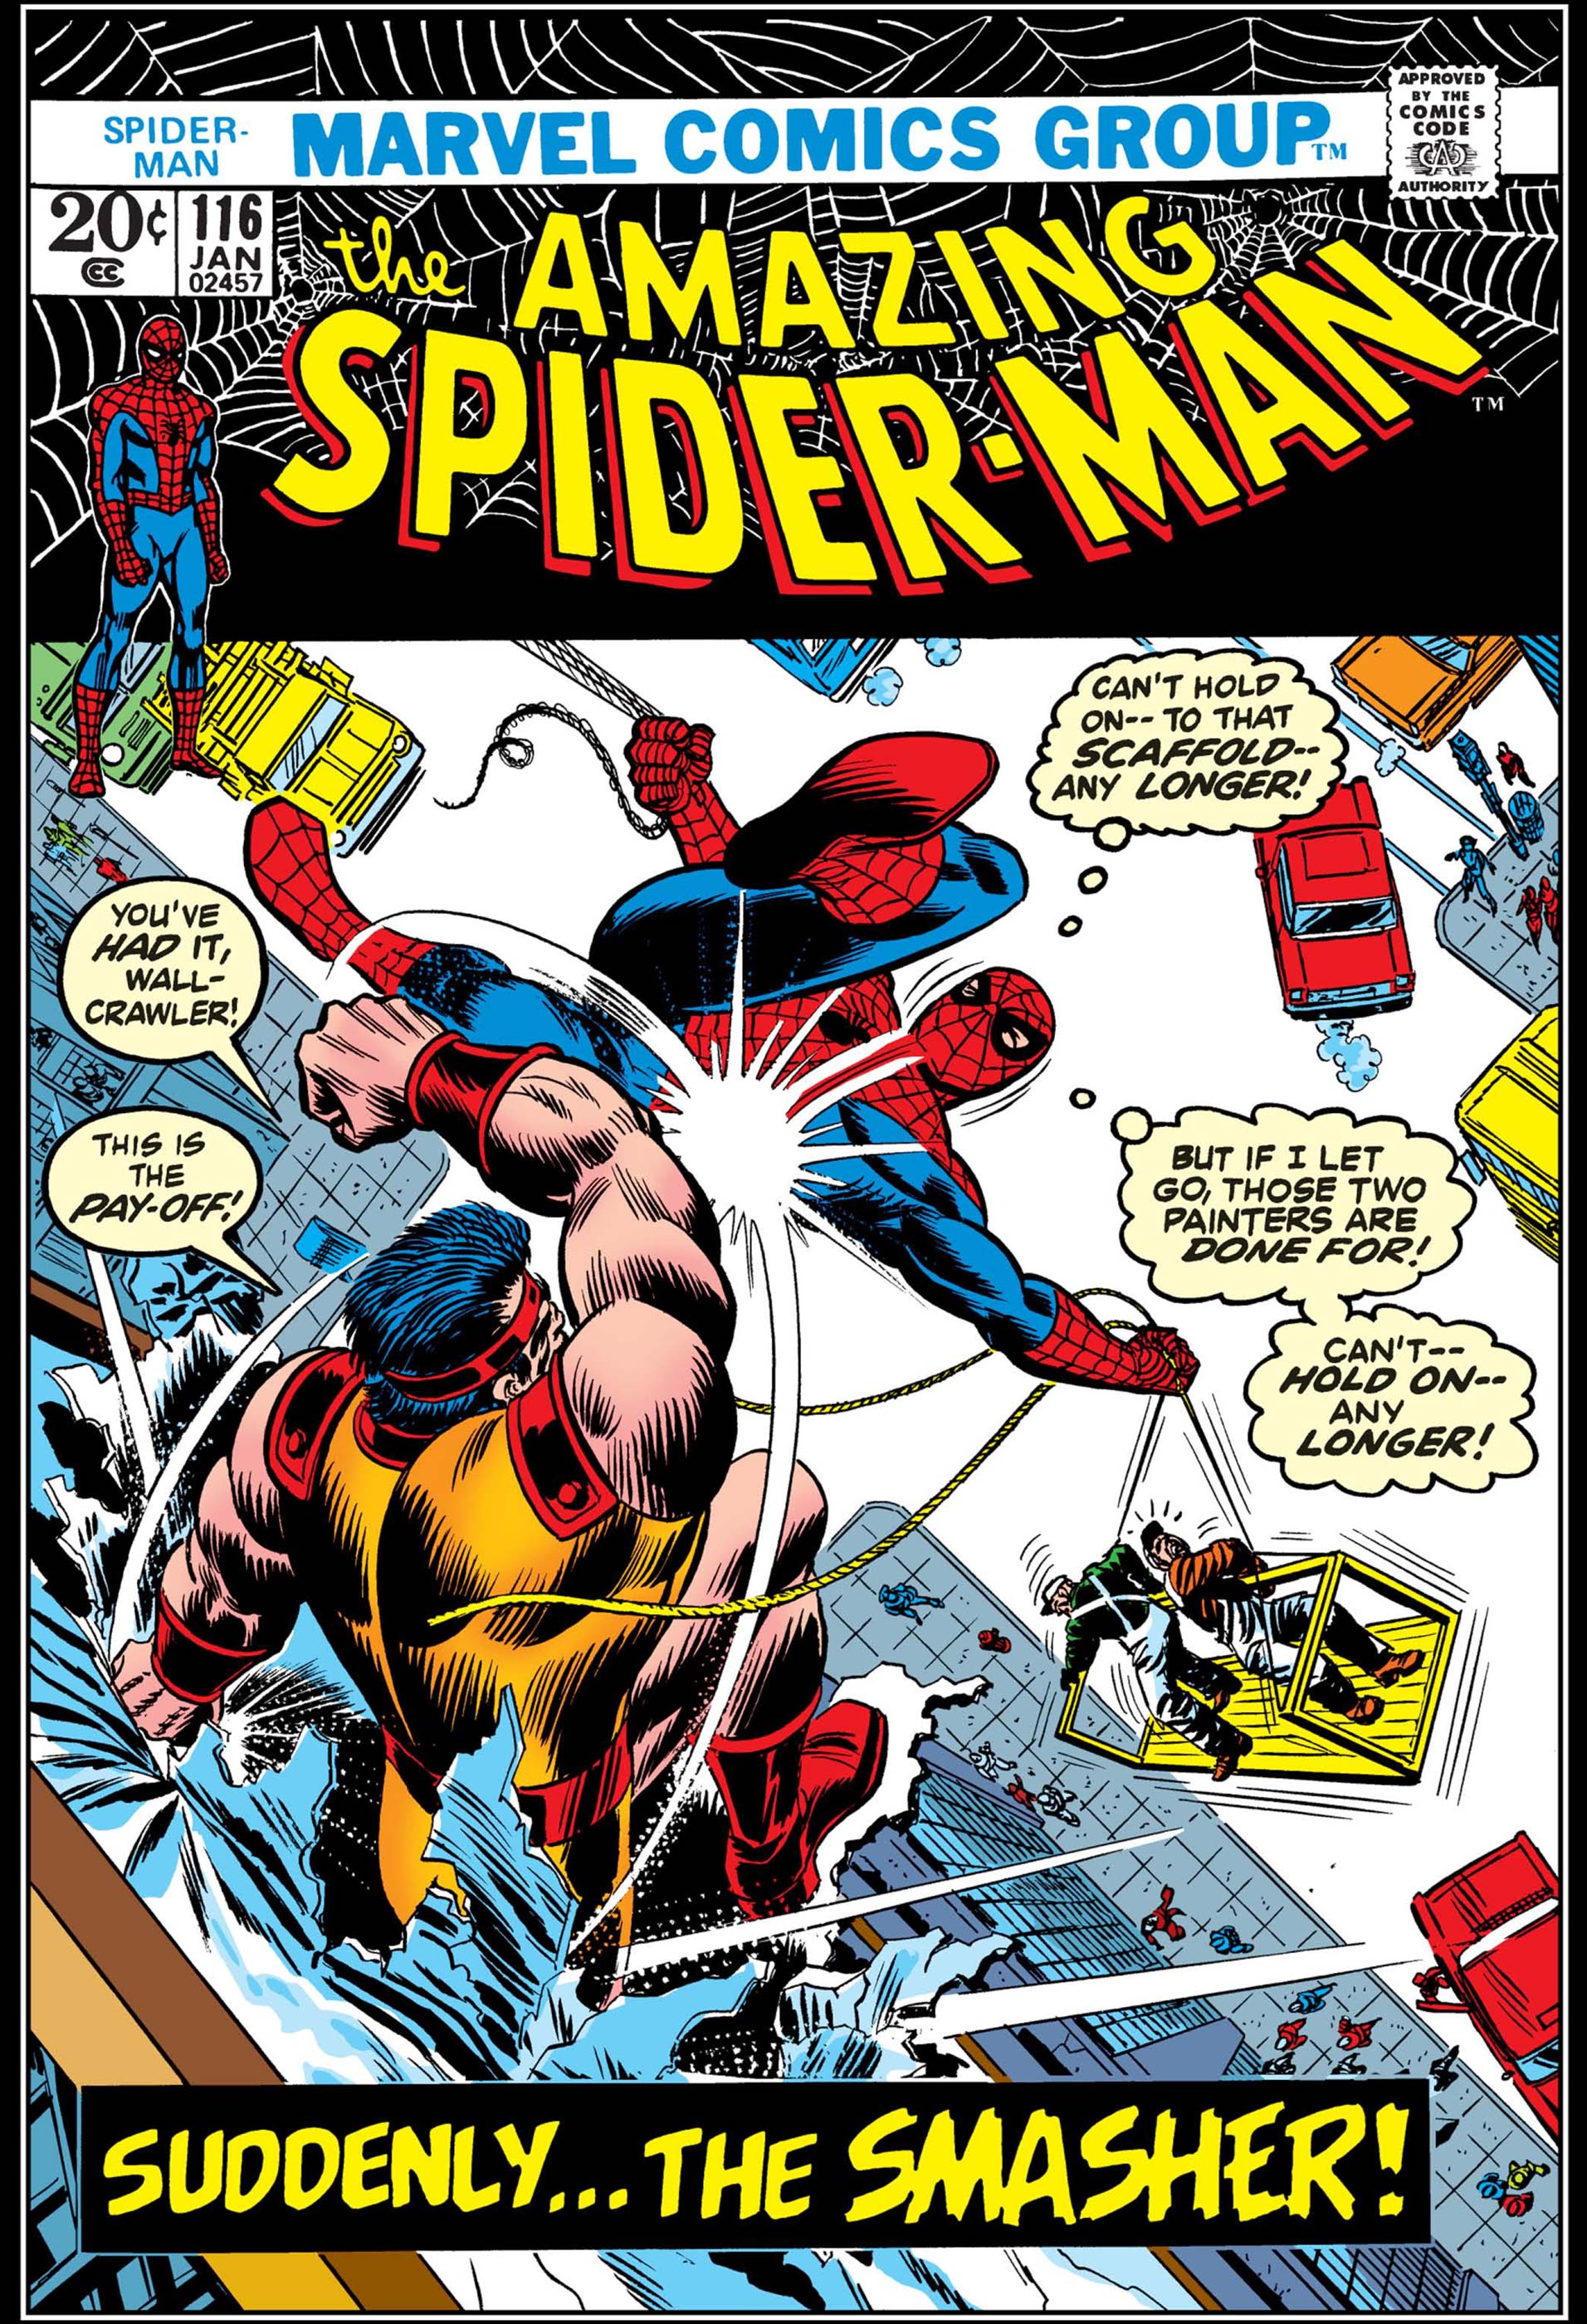 The Amazing Spider-Man (1963) #116 | Comic Issues | Marvel